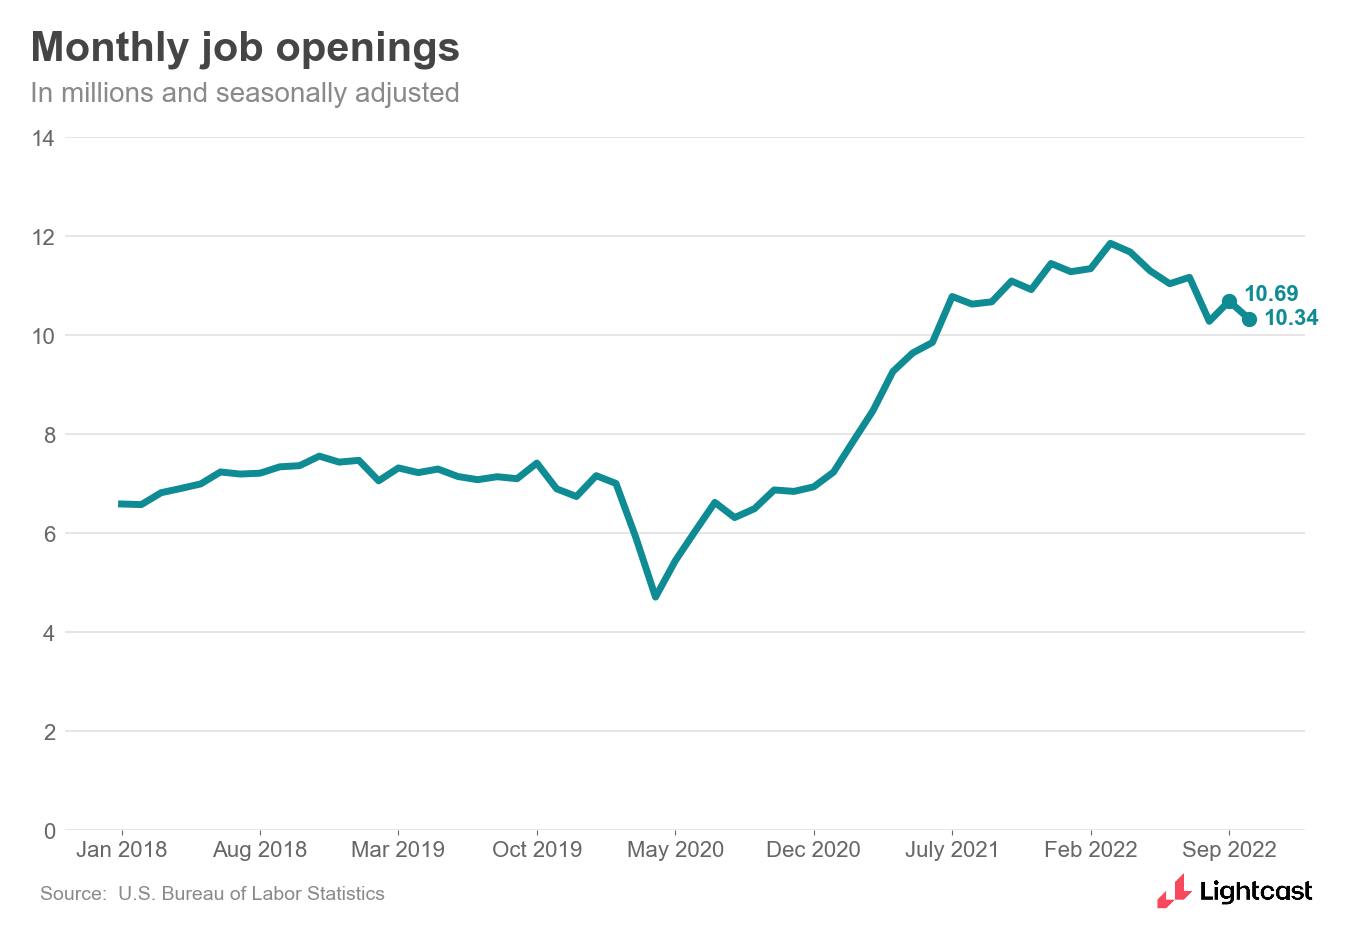 Chart showing monthly job openings in millions